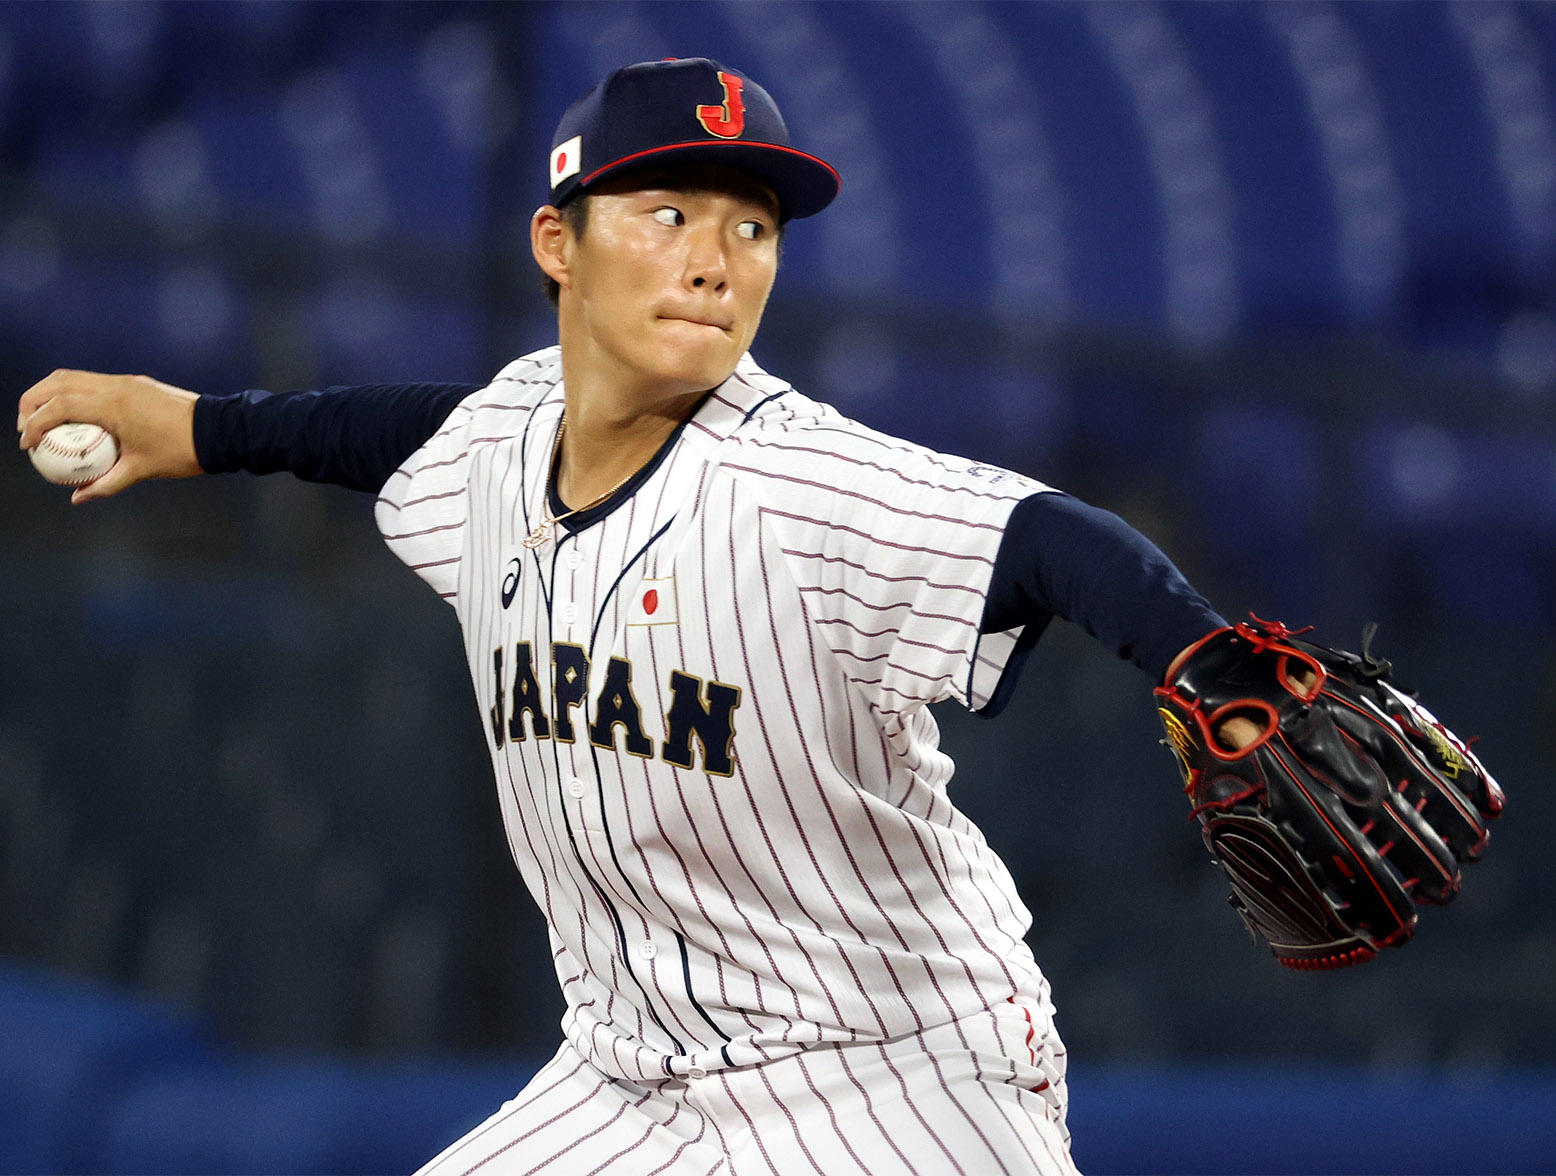 YOKOHAMA, JAPAN - AUGUST 04: Yoshinobu Yamamoto #17 of Team Japan pitches in the first inning against Team Republic of Korea during the semifinals of men's baseball on day twelve of the Tokyo 2020 Olympic Games at Yokohama Baseball Stadium on August 04, 2021 in Yokohama, Japan. (Photo by Koji Watanabe/Getty Images)